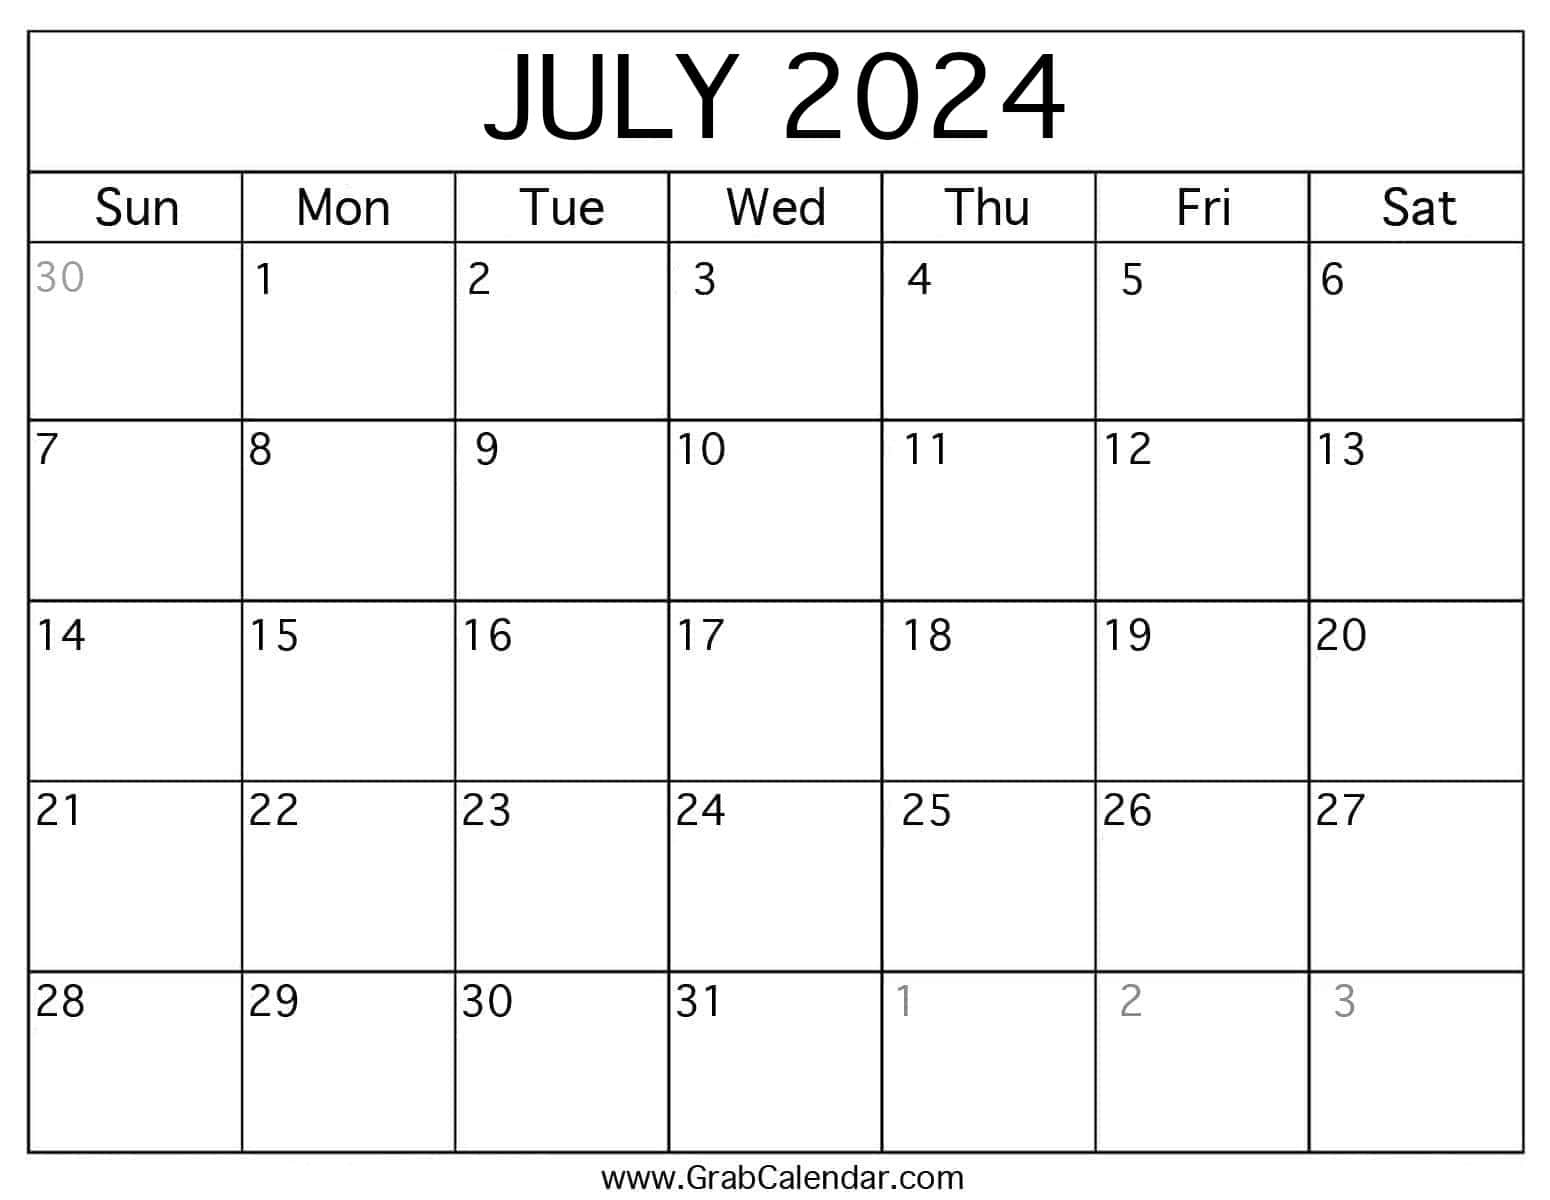 Printable July 2024 Calendar throughout The Calendar of July 2024